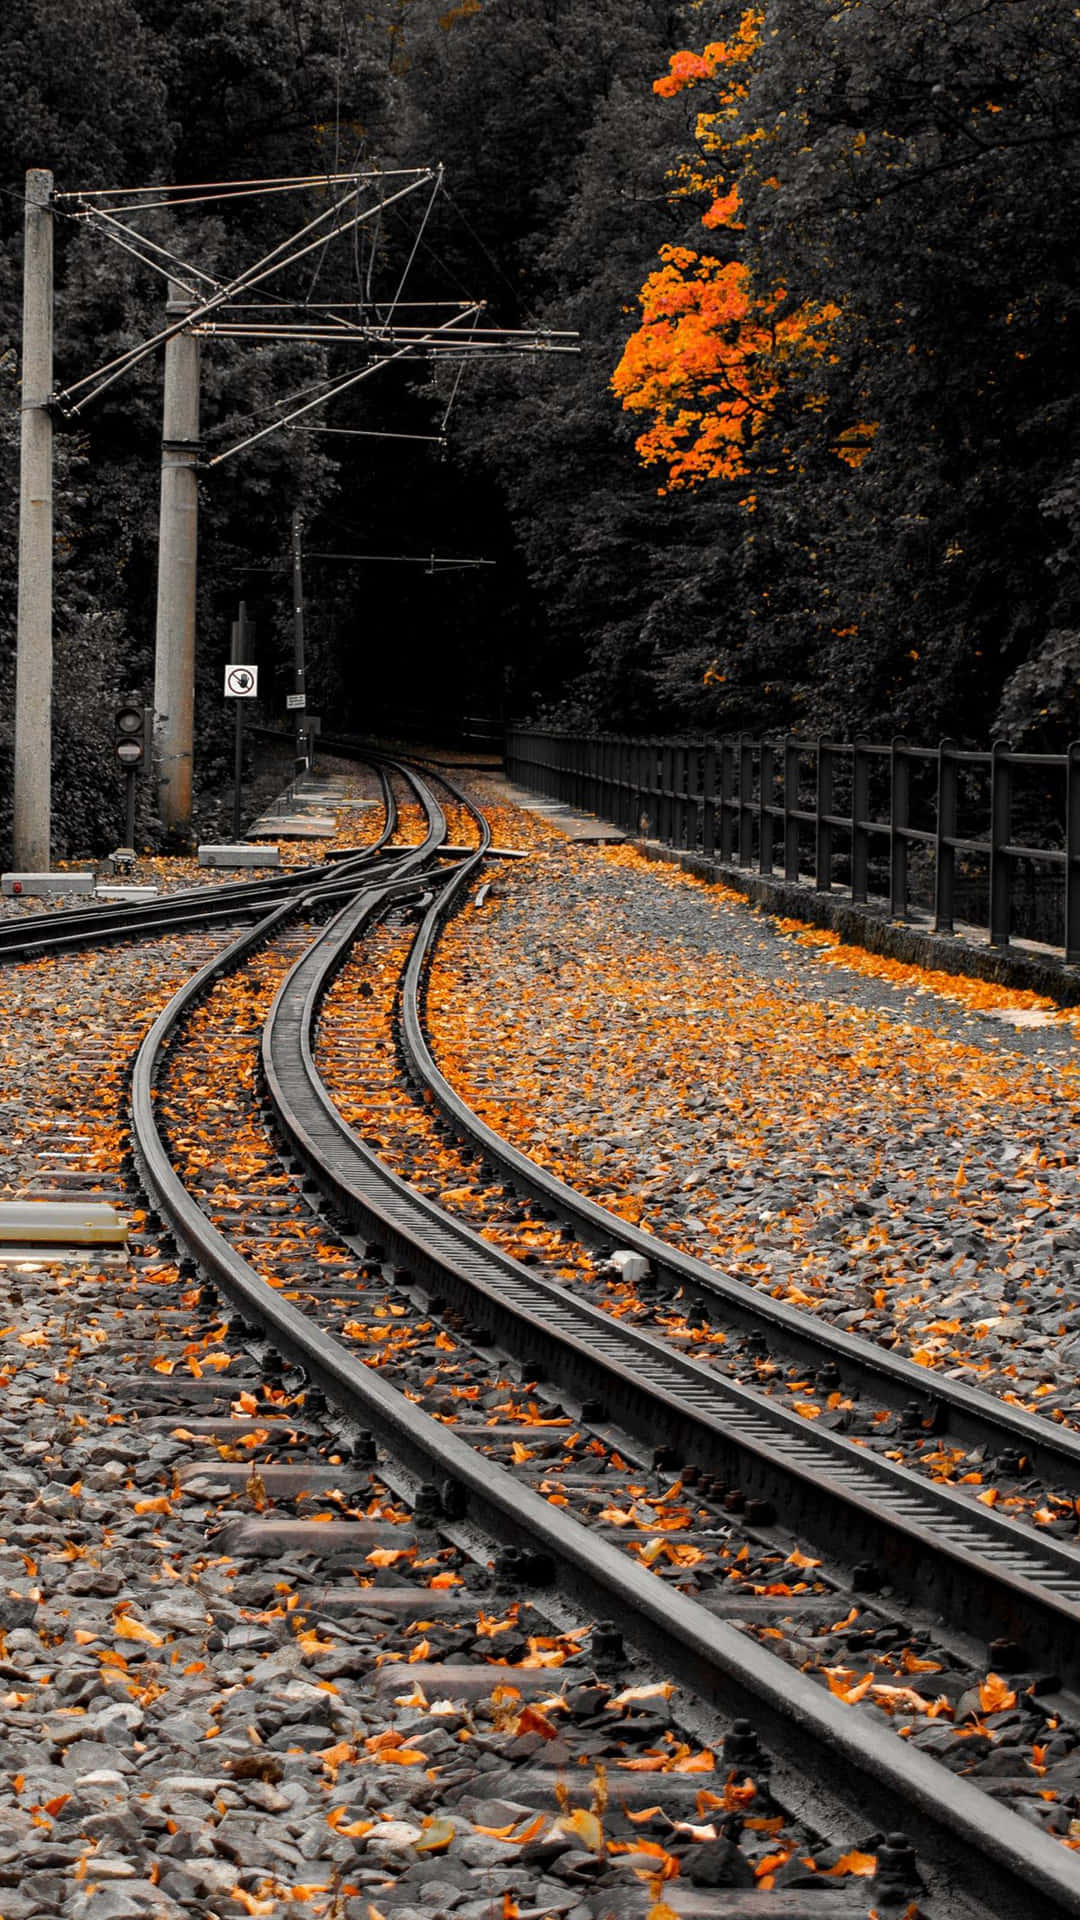 A Train Tracks With Leaves